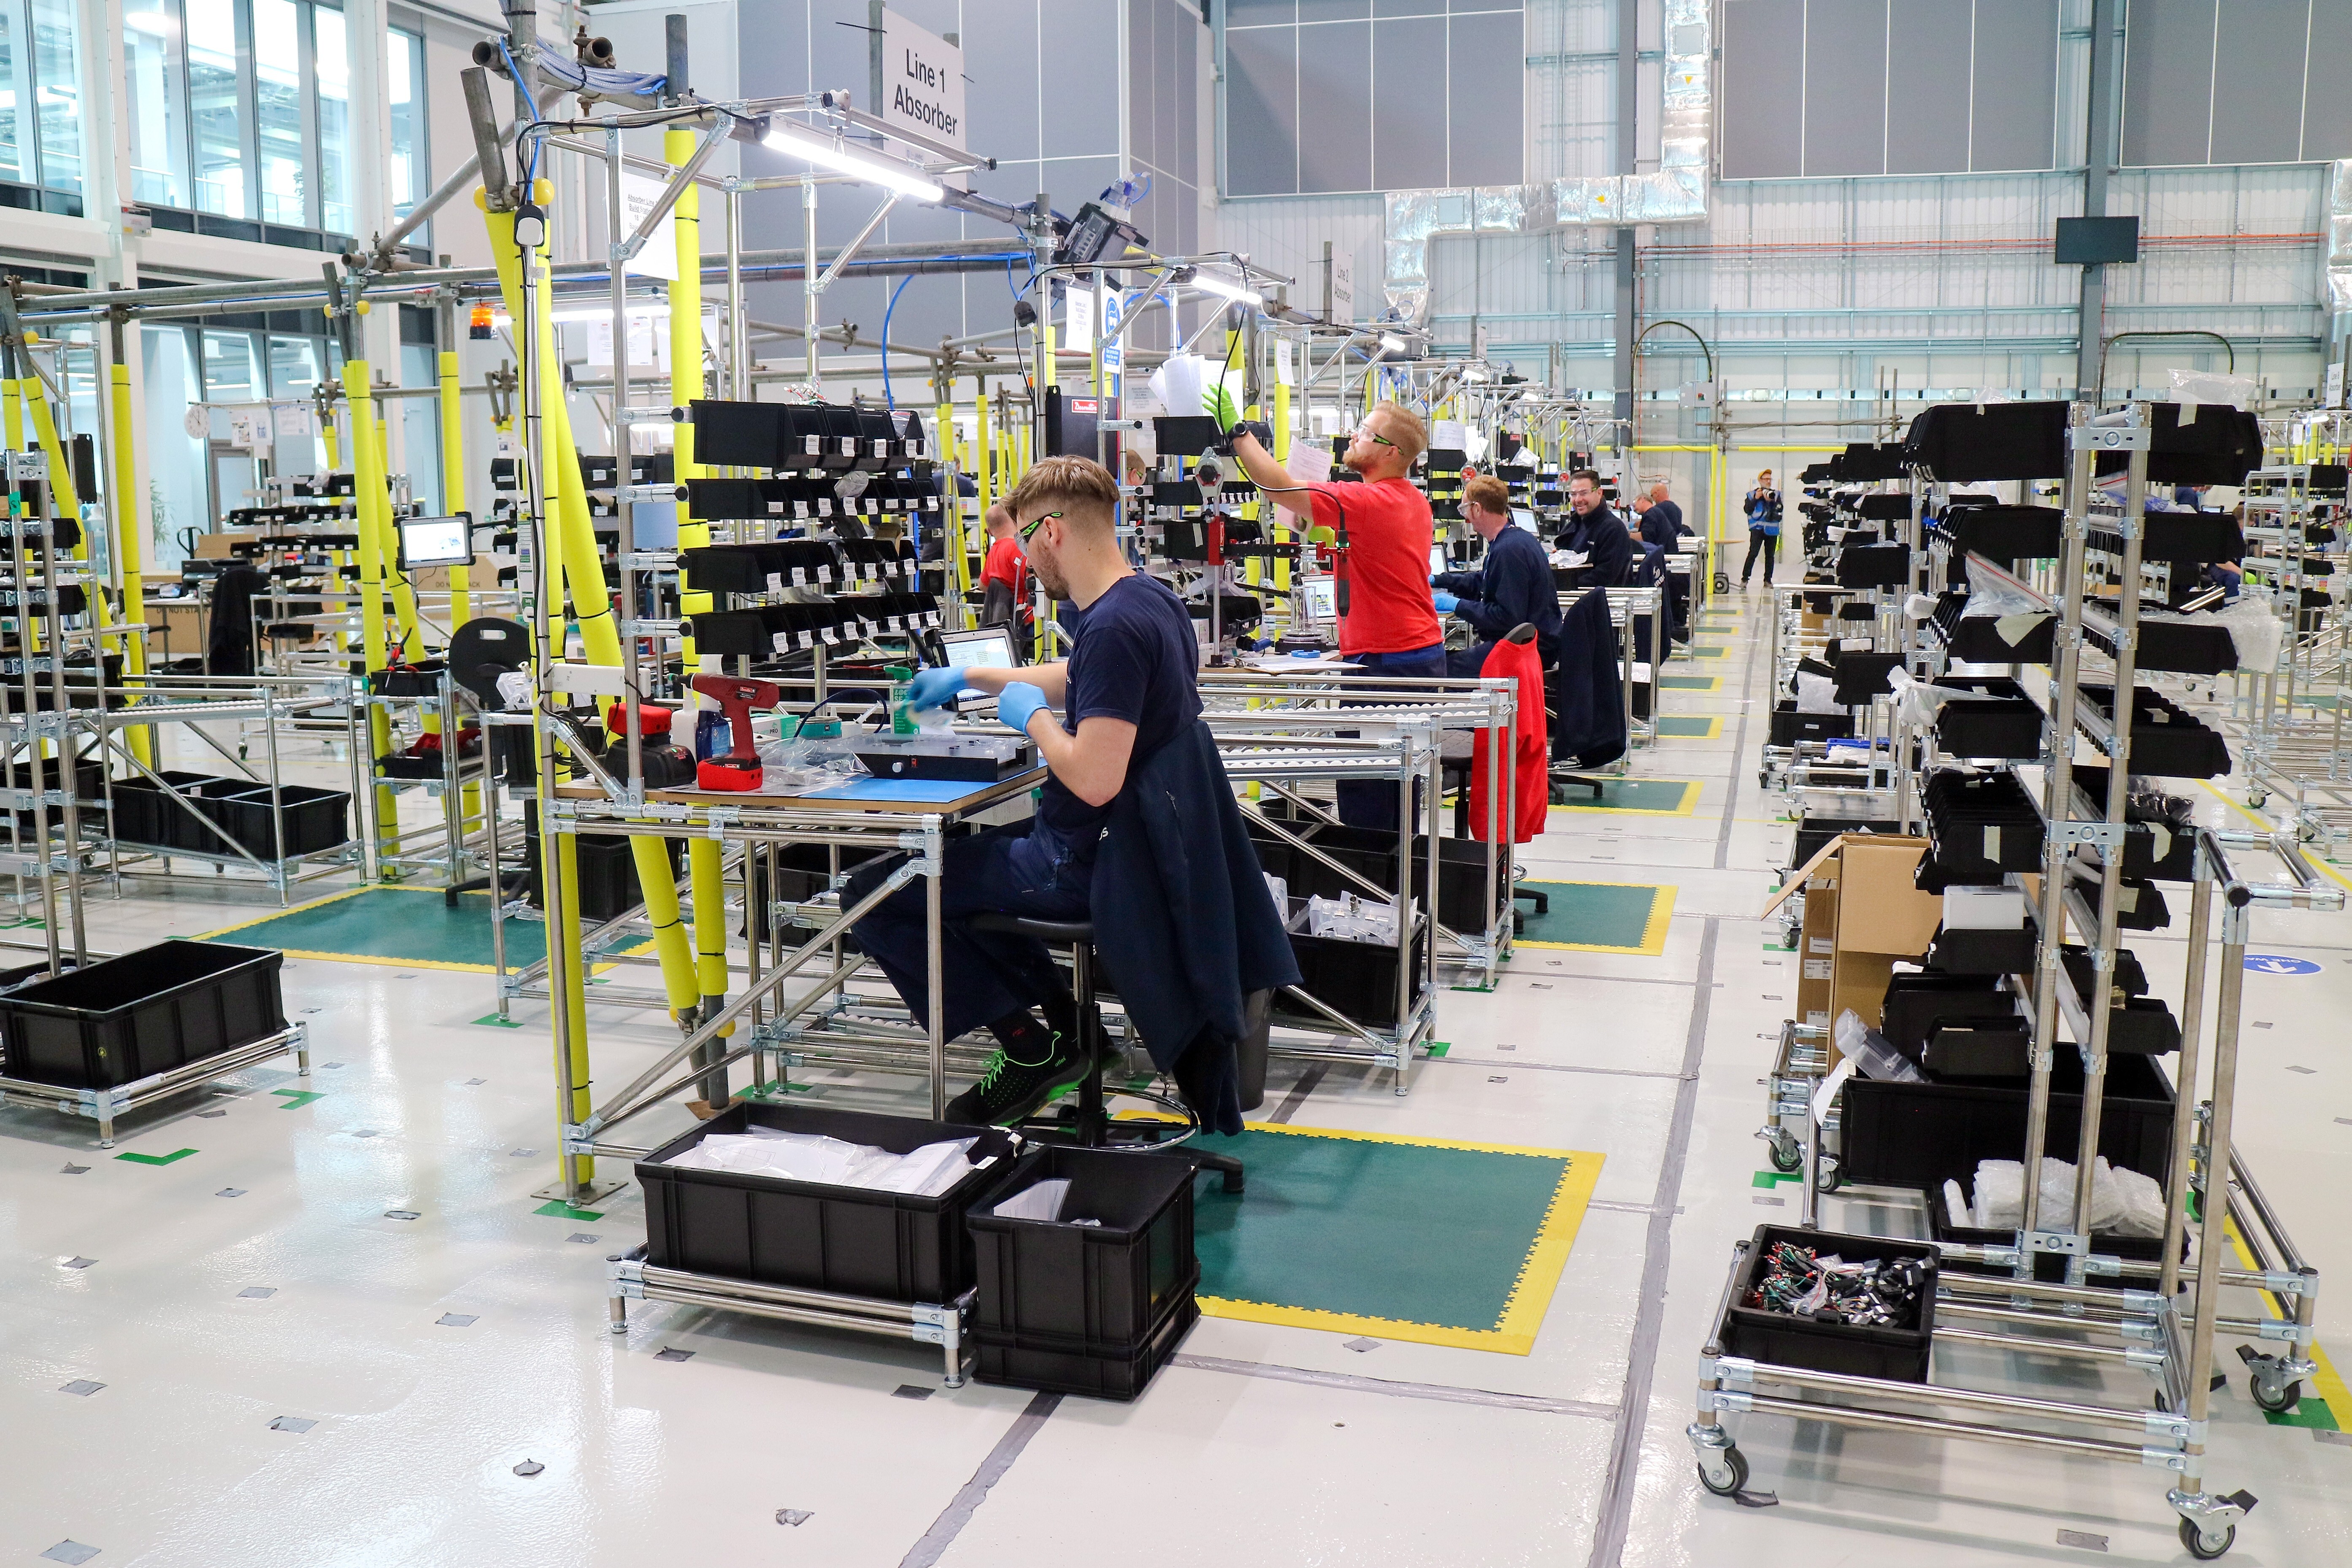 Employees work on a ventilator production line in an adapted hangar at an Airbus SE assembly plant in Broughton, Britain, on April 30. Industrial giants like Airbus are lending their factory floors to meet government orders. Photo: Bloomberg